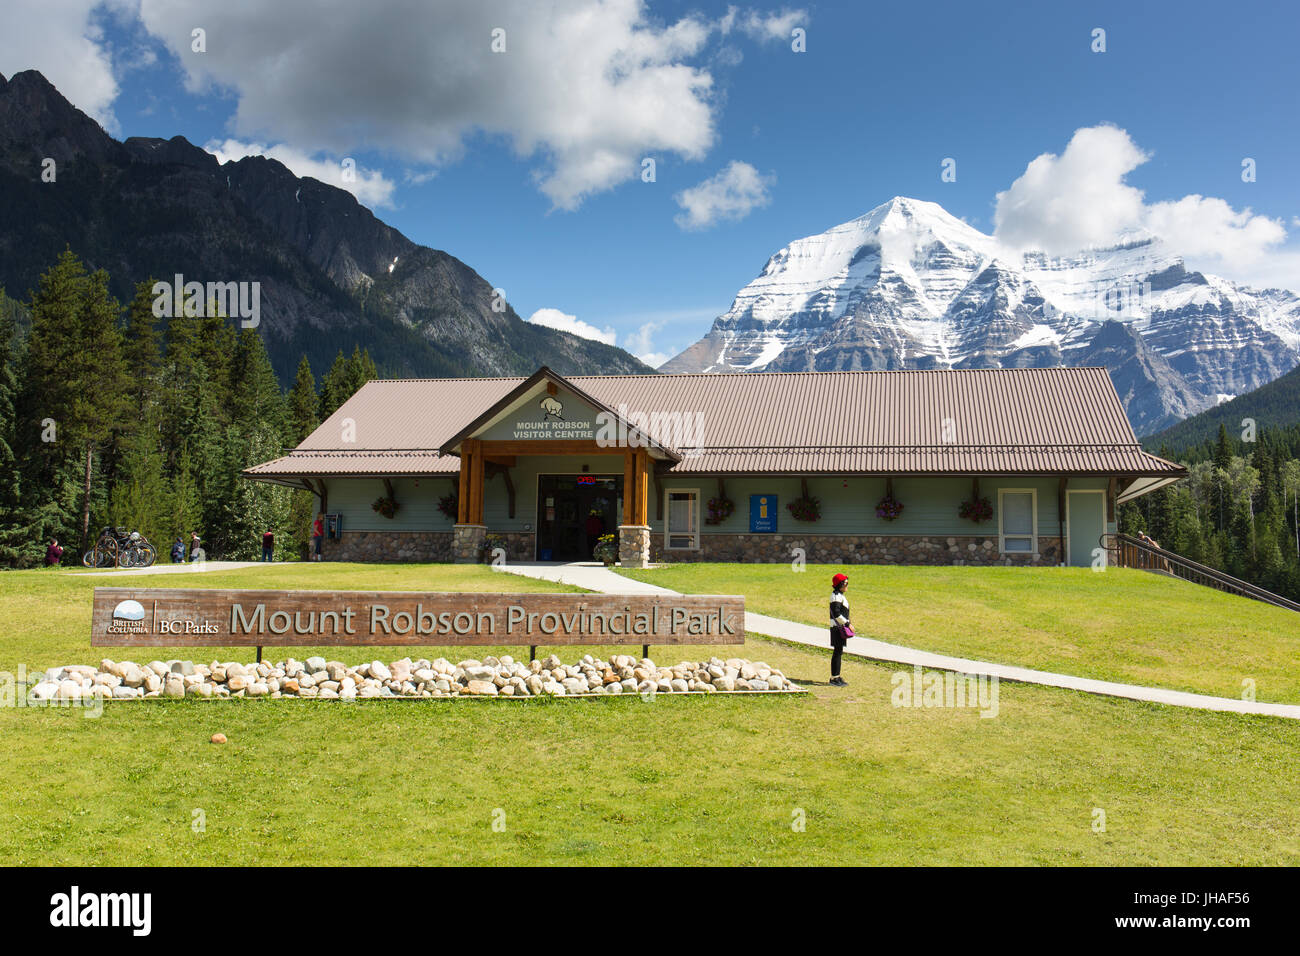 Mount Robson Provincial Park Visitor Center at highway 16, British Columbia, Canada Stock Photo